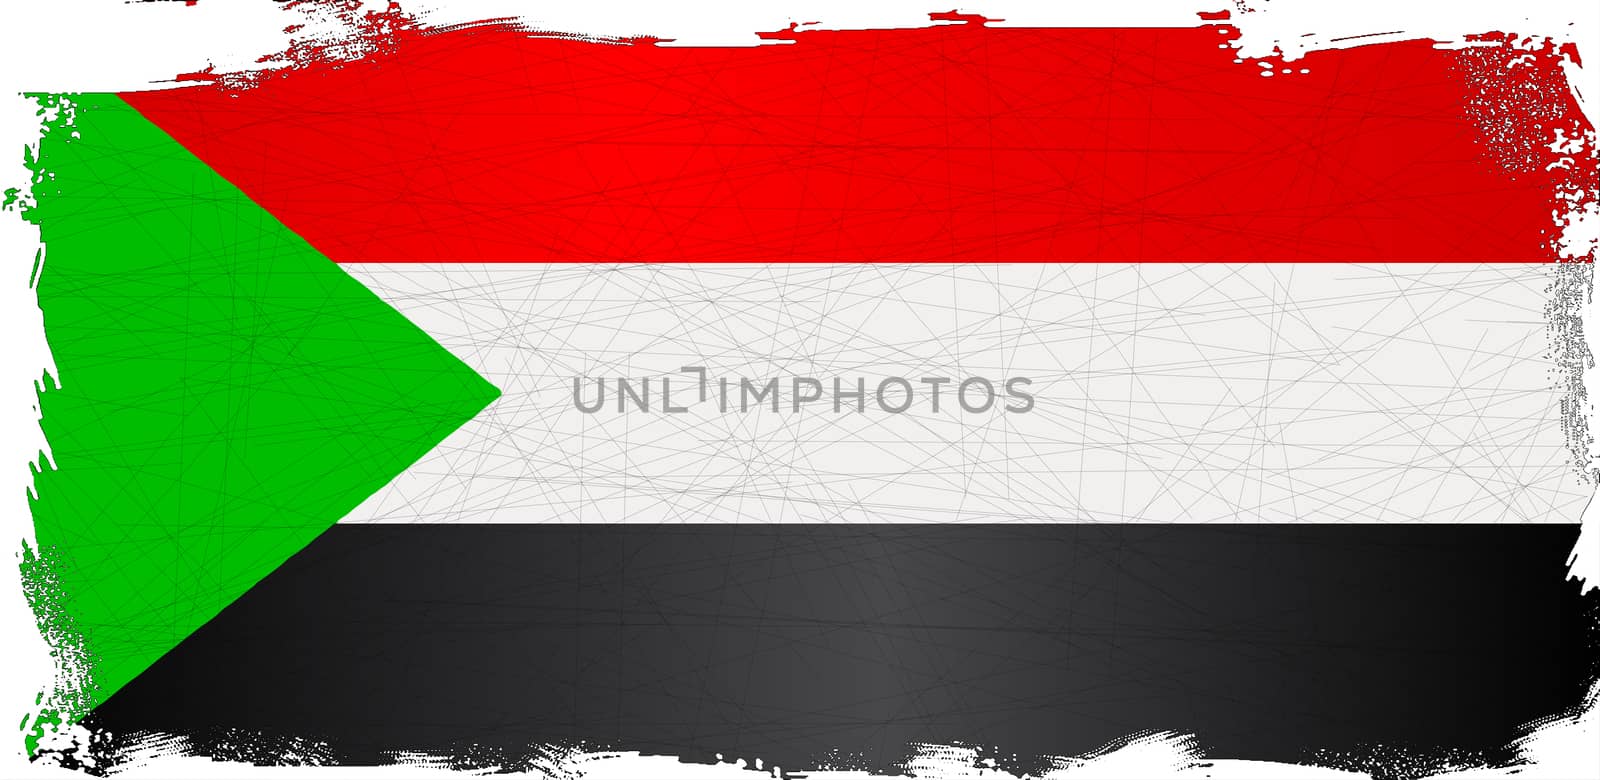 The flag of the African country Sudan